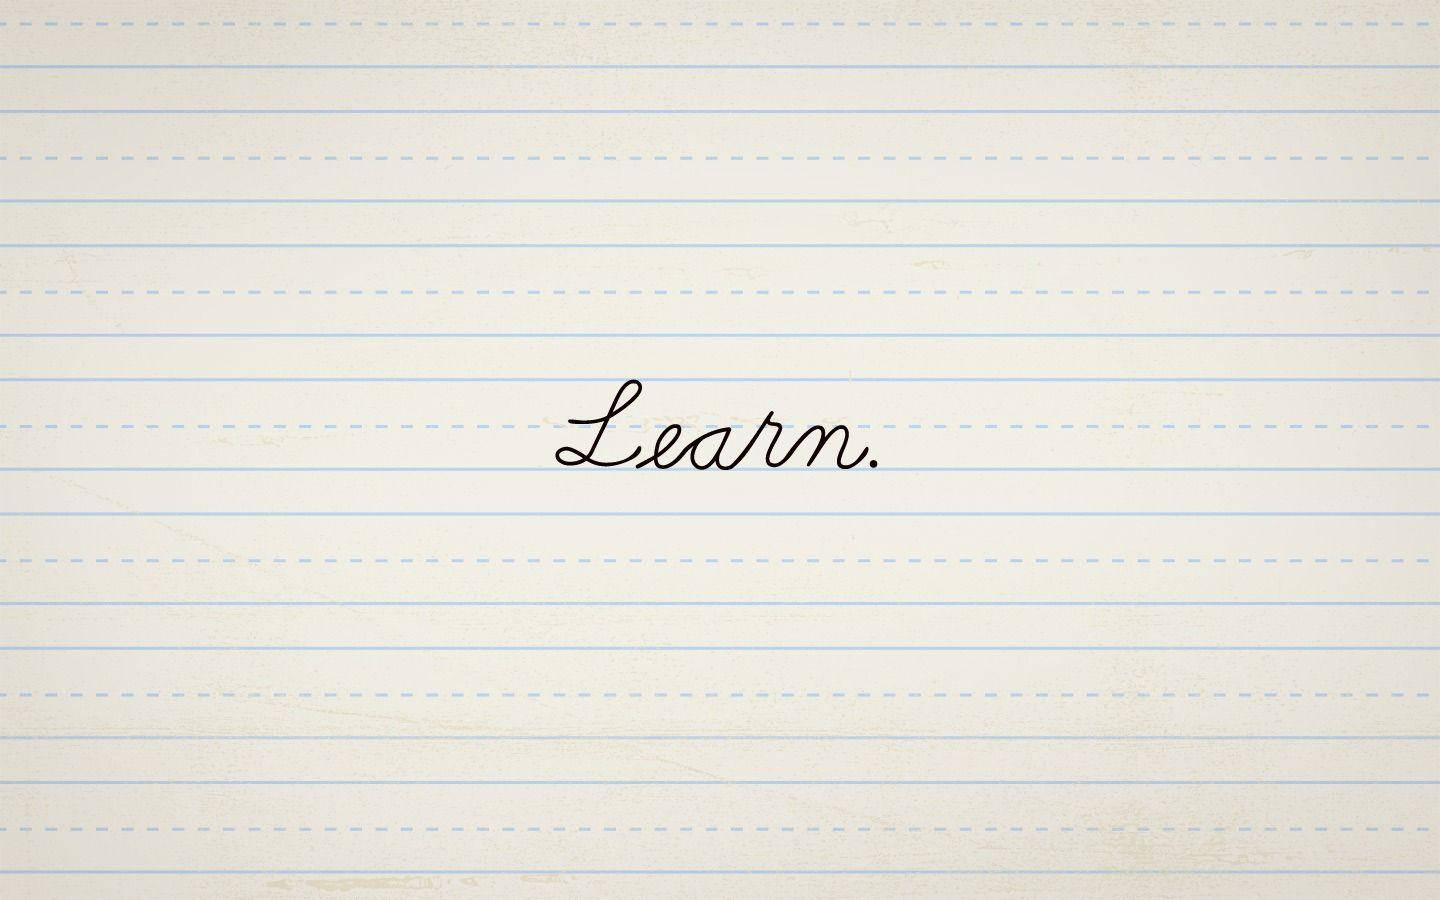 Cursive Text Learning Wallpaper